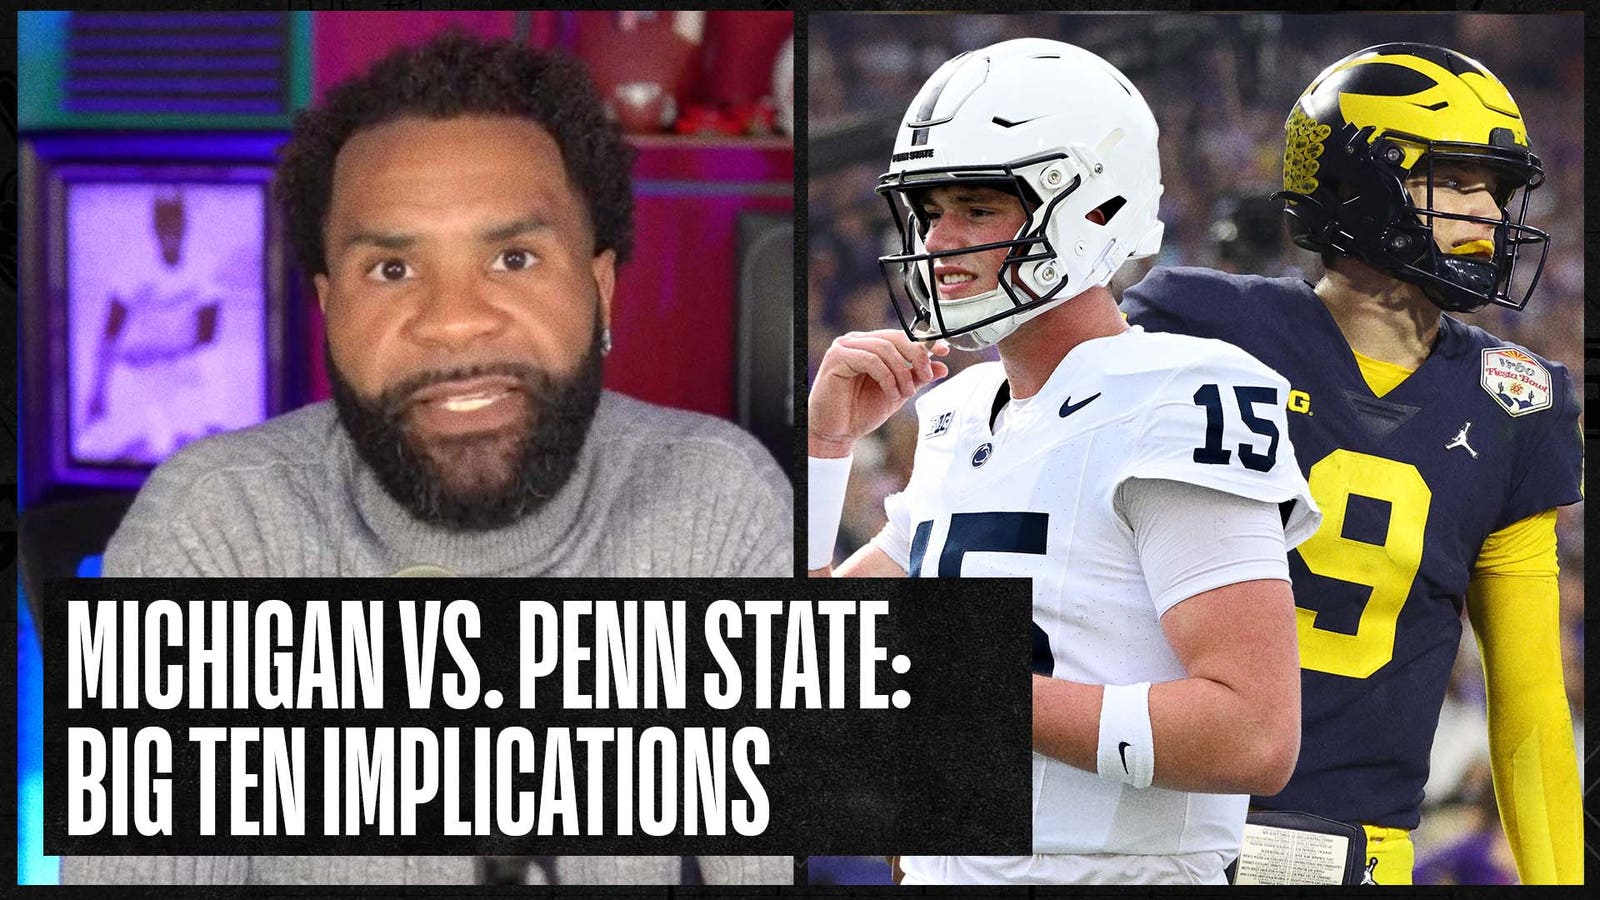 Michigan vs. Penn State Preview: Big Ten implications on the line